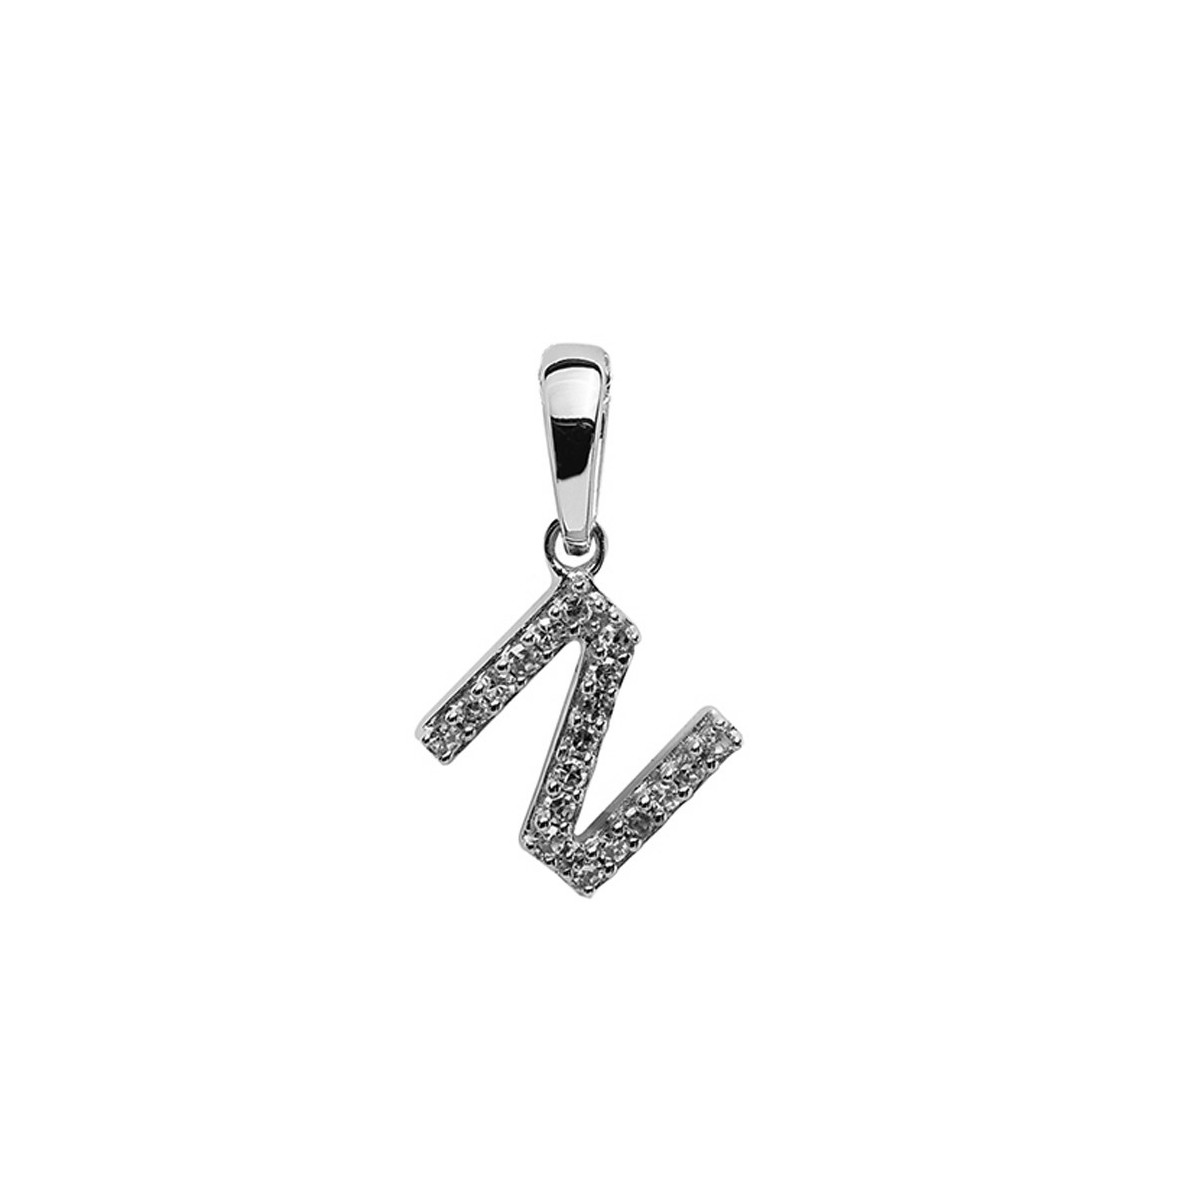 N INITIAL PENDANT IN WHITE GOLD AND DIAMONDS